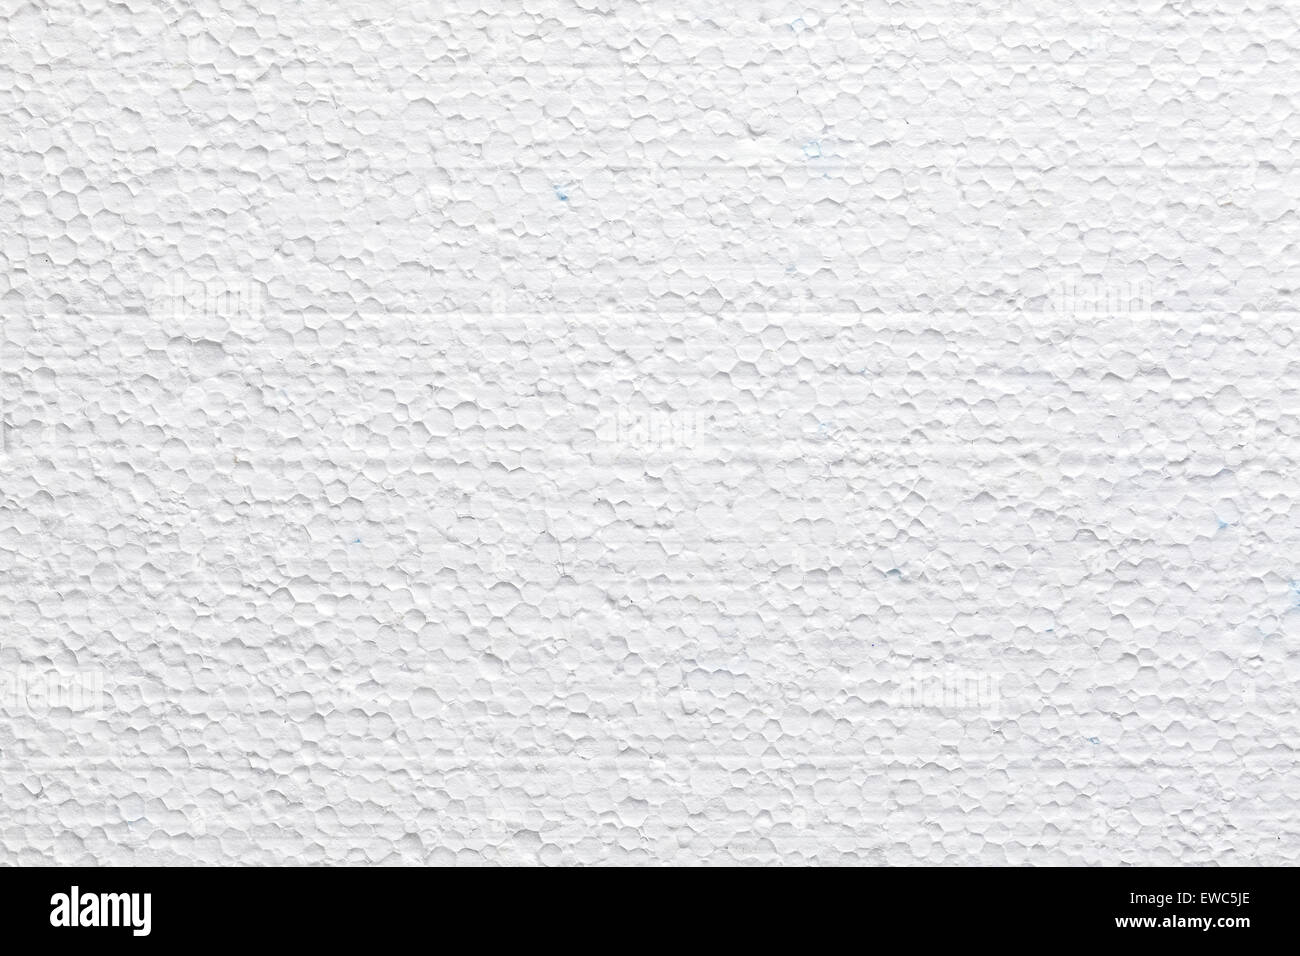 High quality polystyrene foam texture or background. Stock Photo